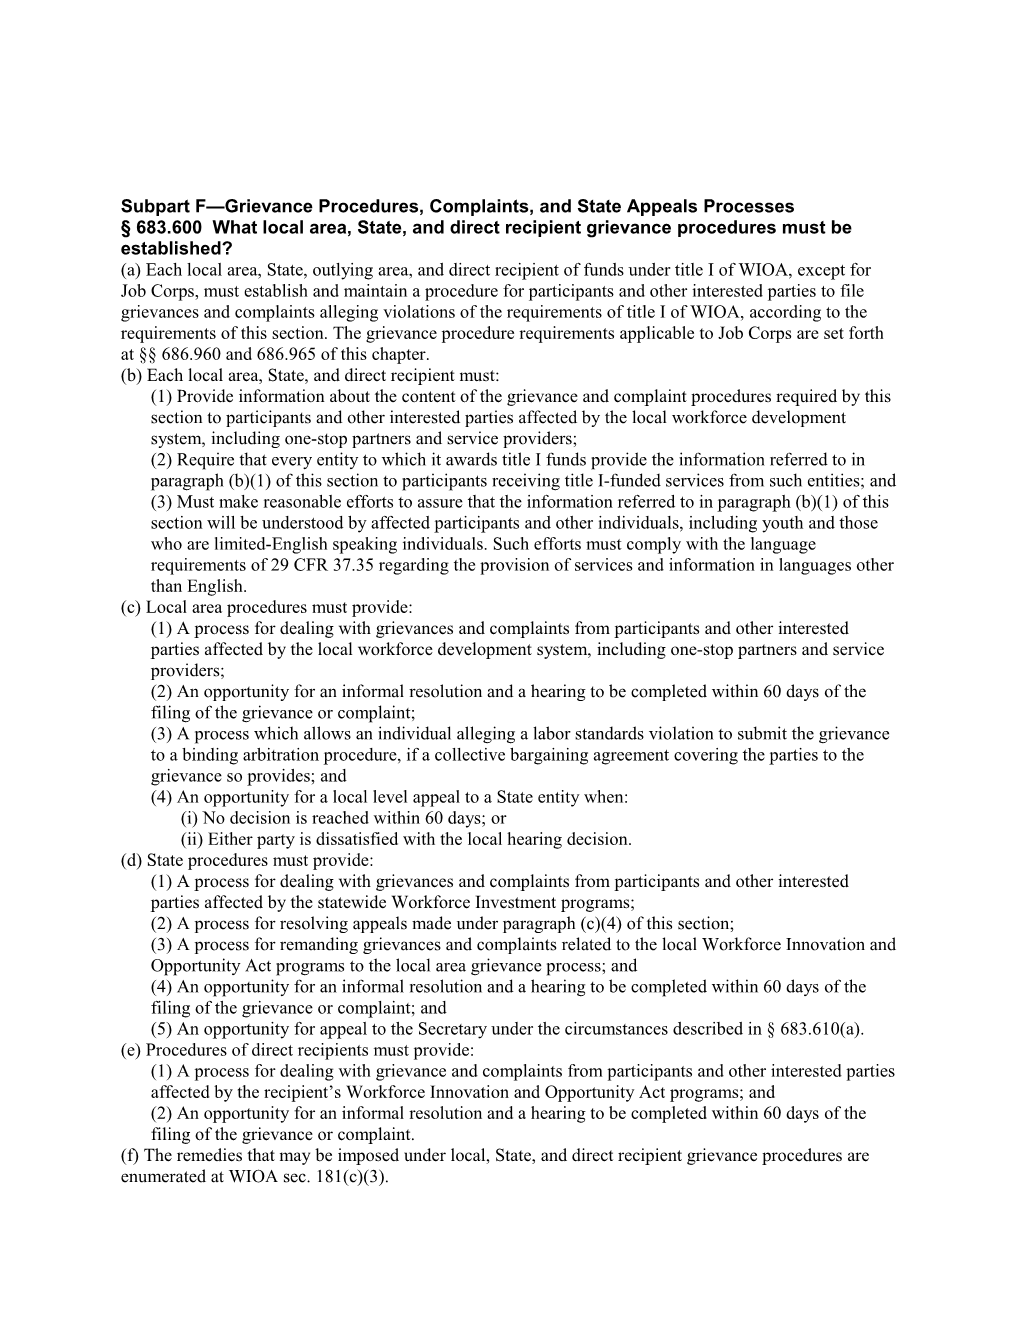 Subpart F Grievance Procedures,Complaints, and State Appealsprocesses